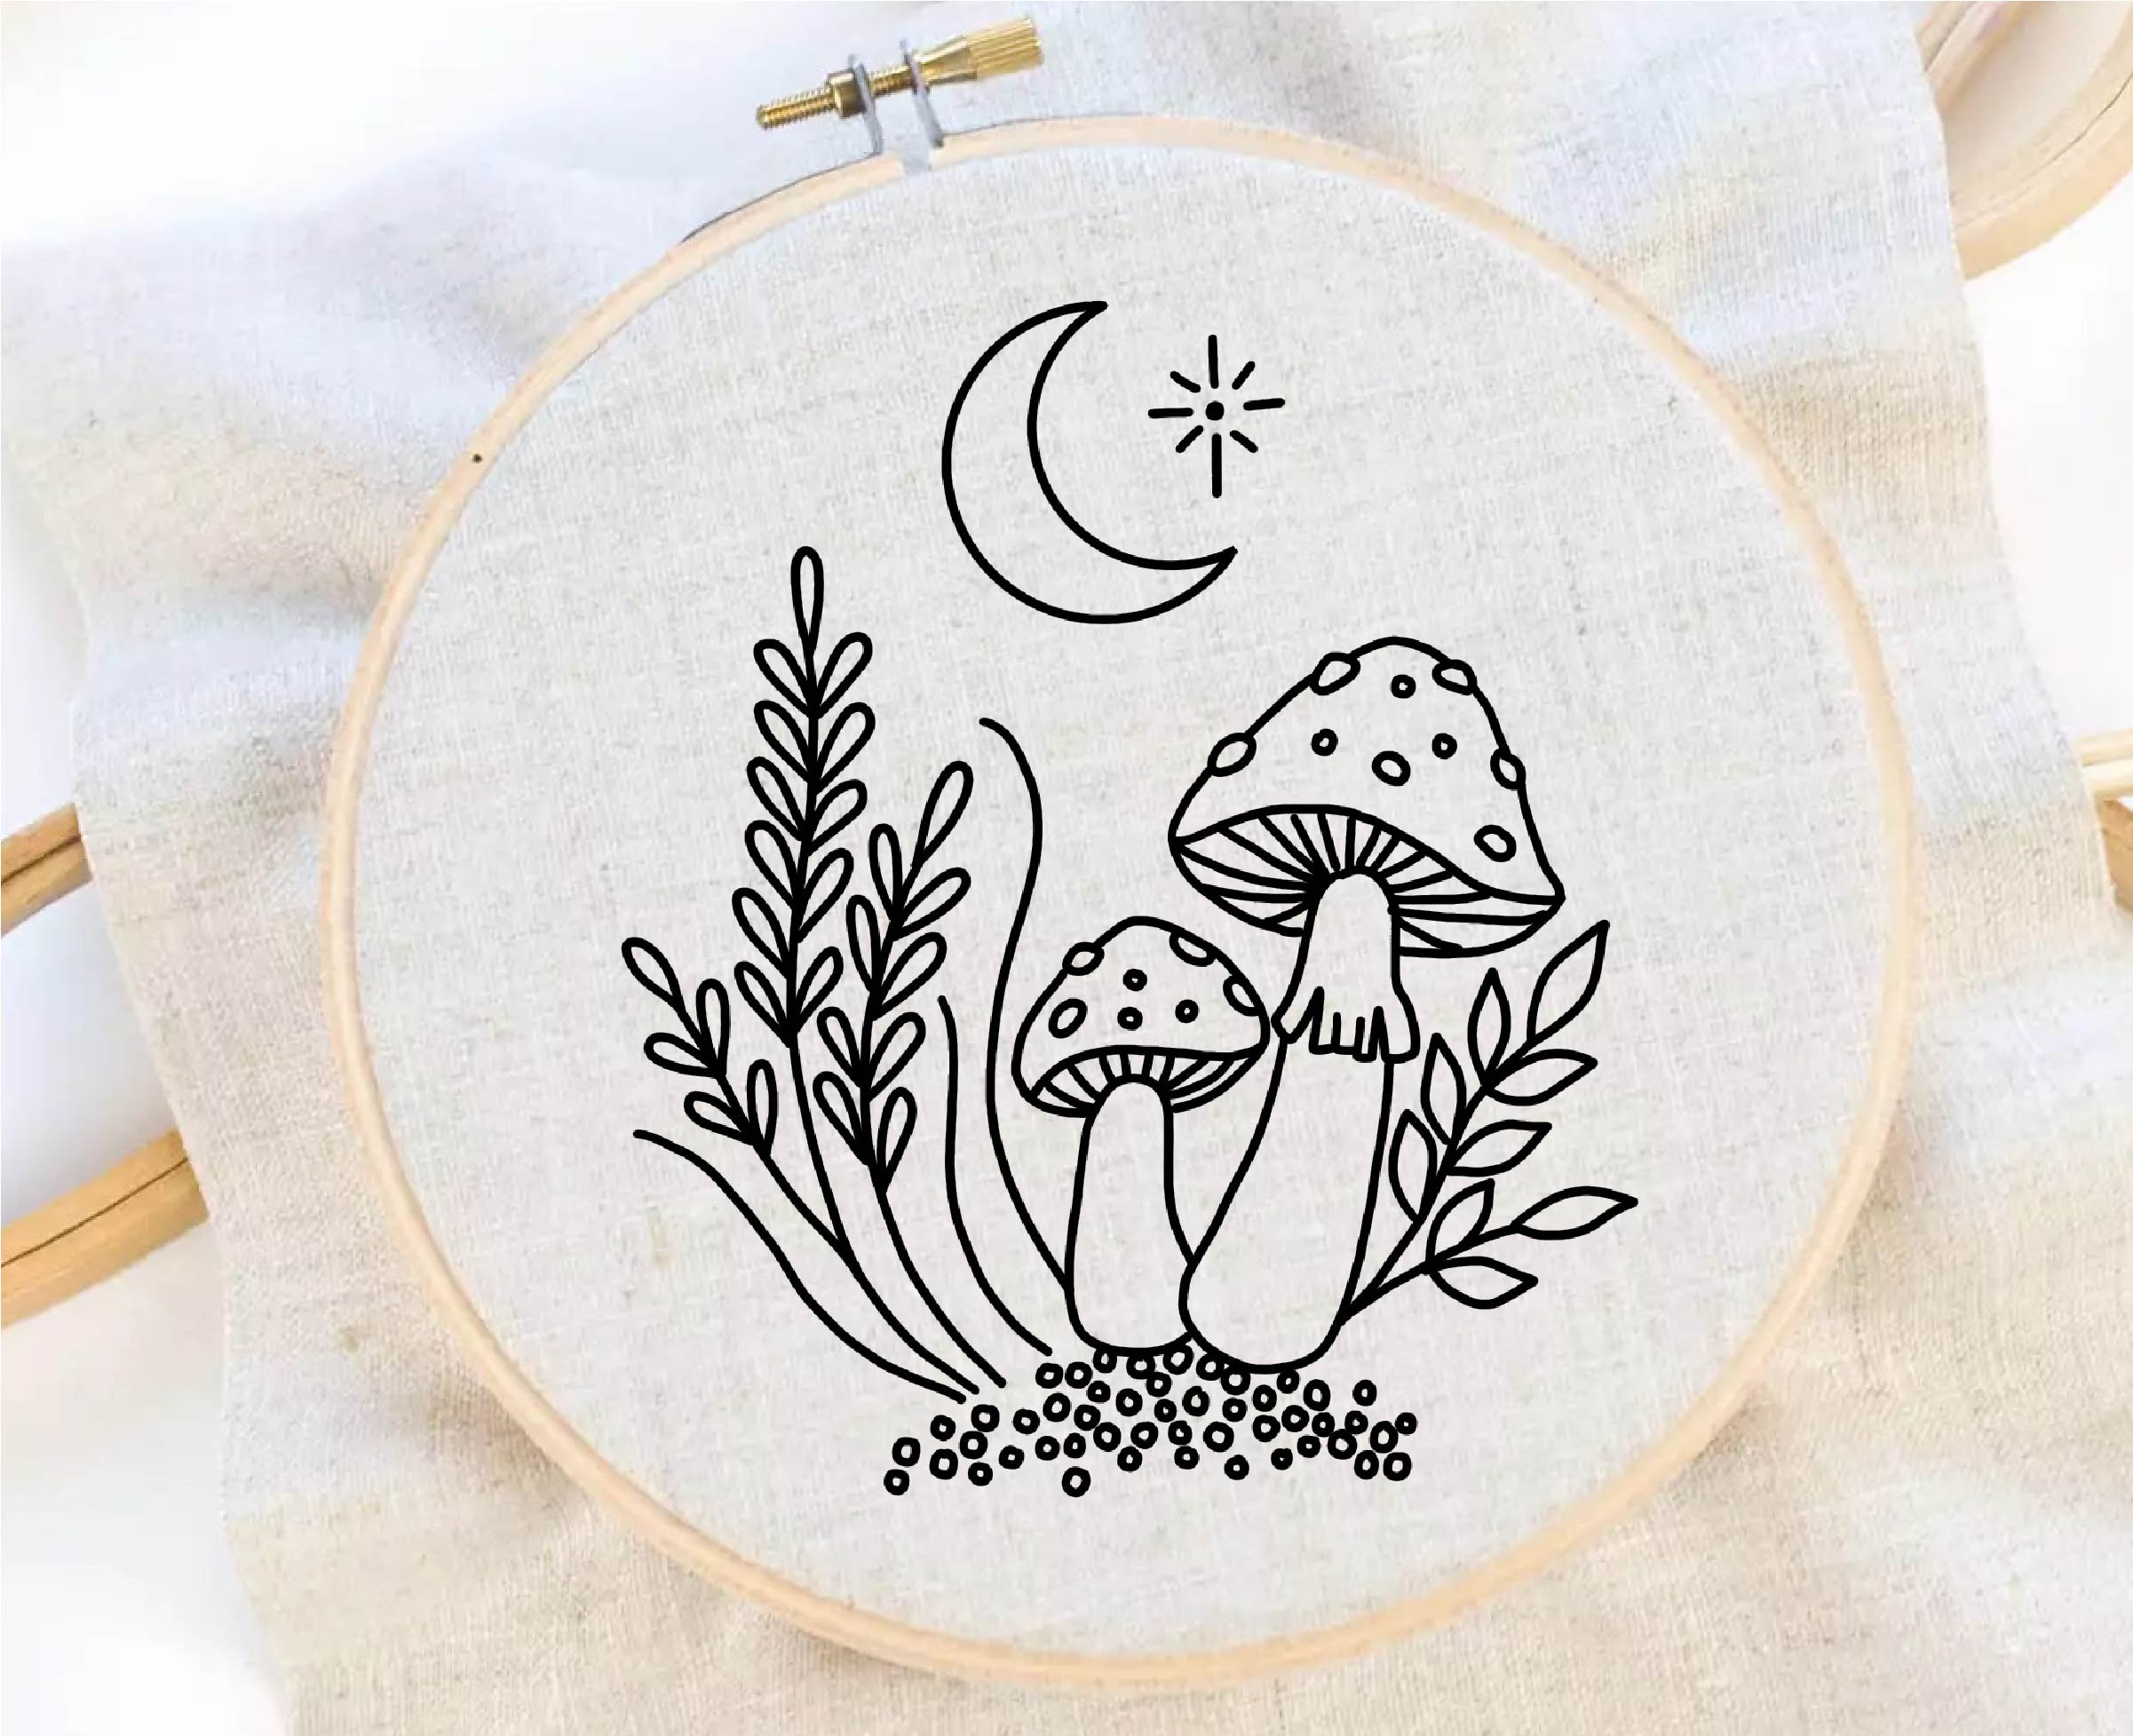 MAGICAL MUSHROOM Embroidery Kit  Buy Embroidery Kits Online – Craft Club Co